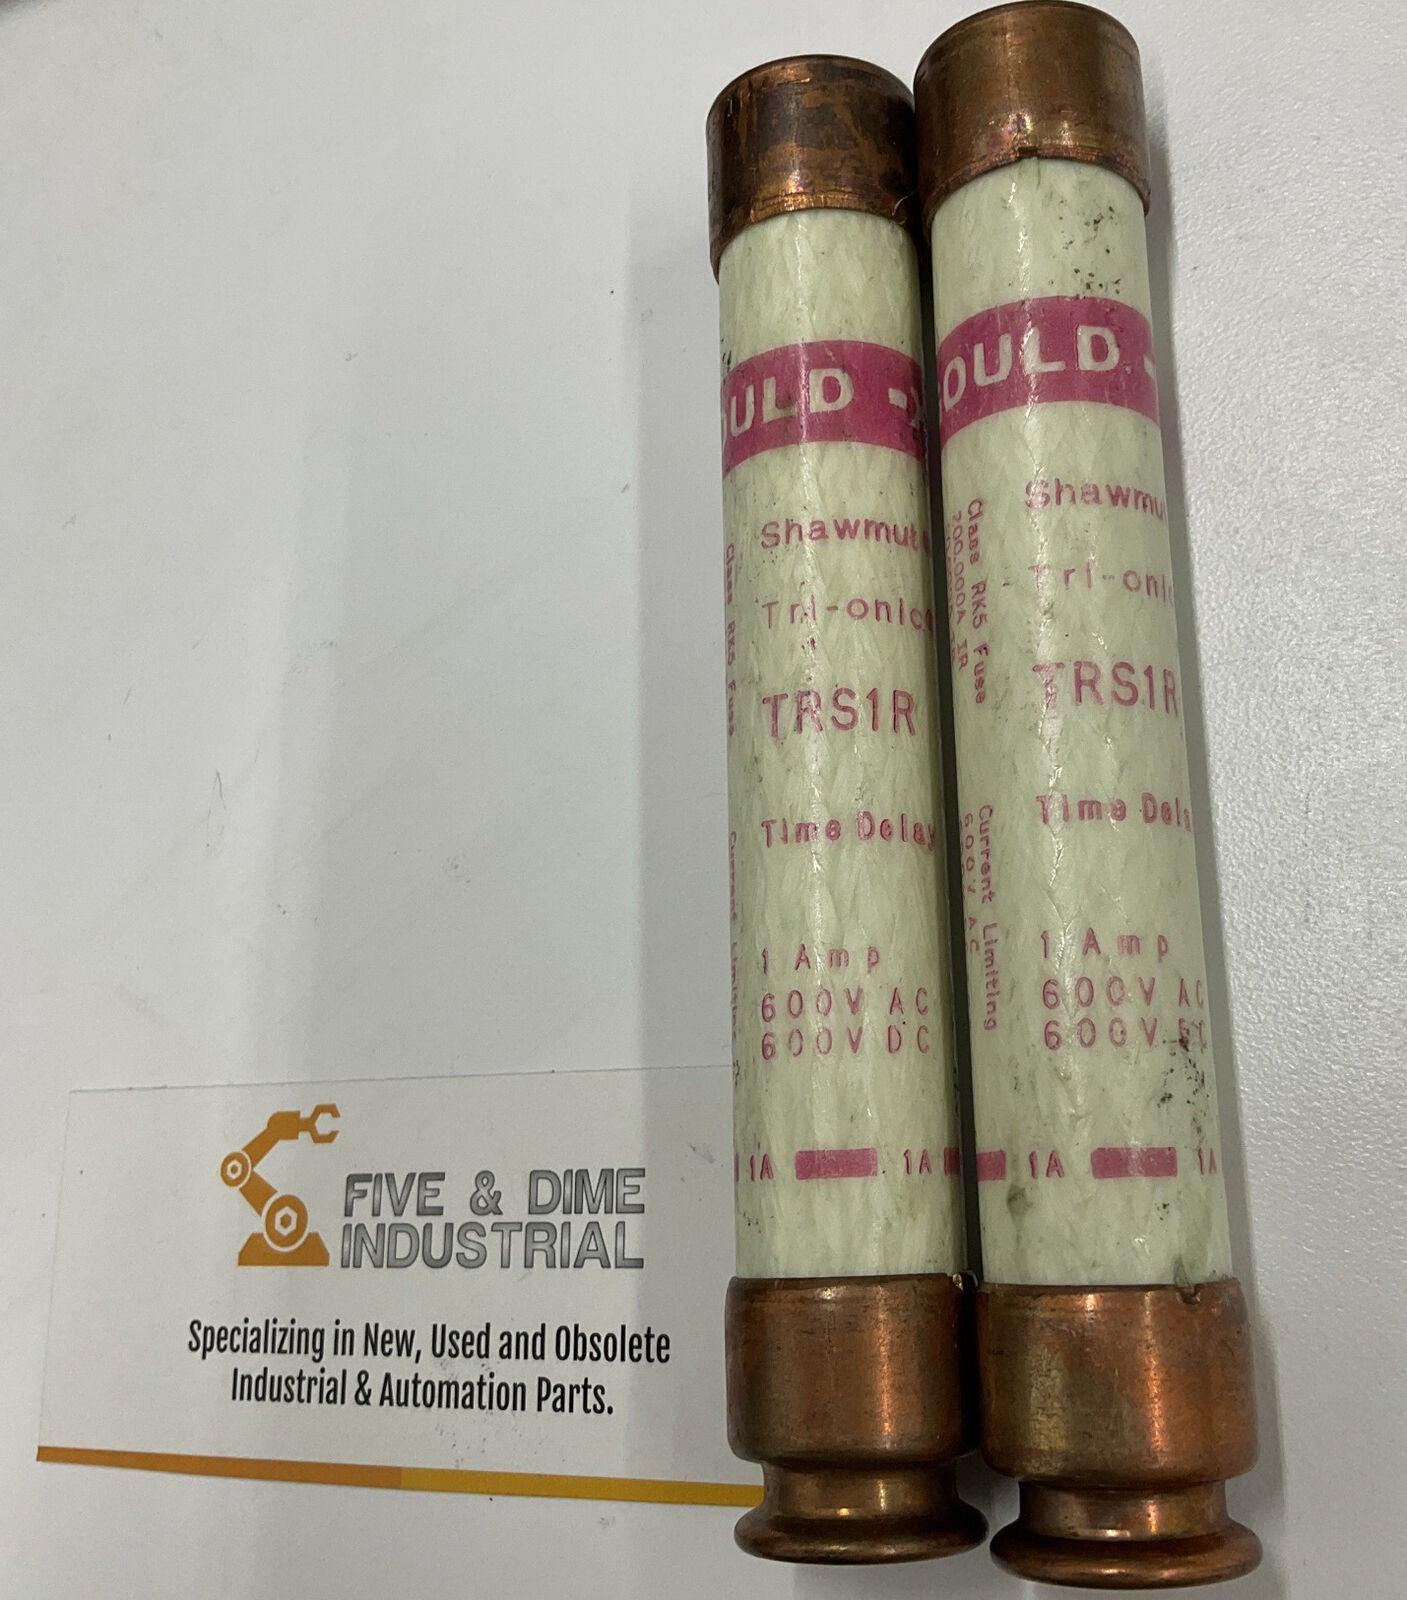 Gould Shawmut Tri-Onic TRS1R Lot of 2 Time Delay Fuses (CL112) - 0